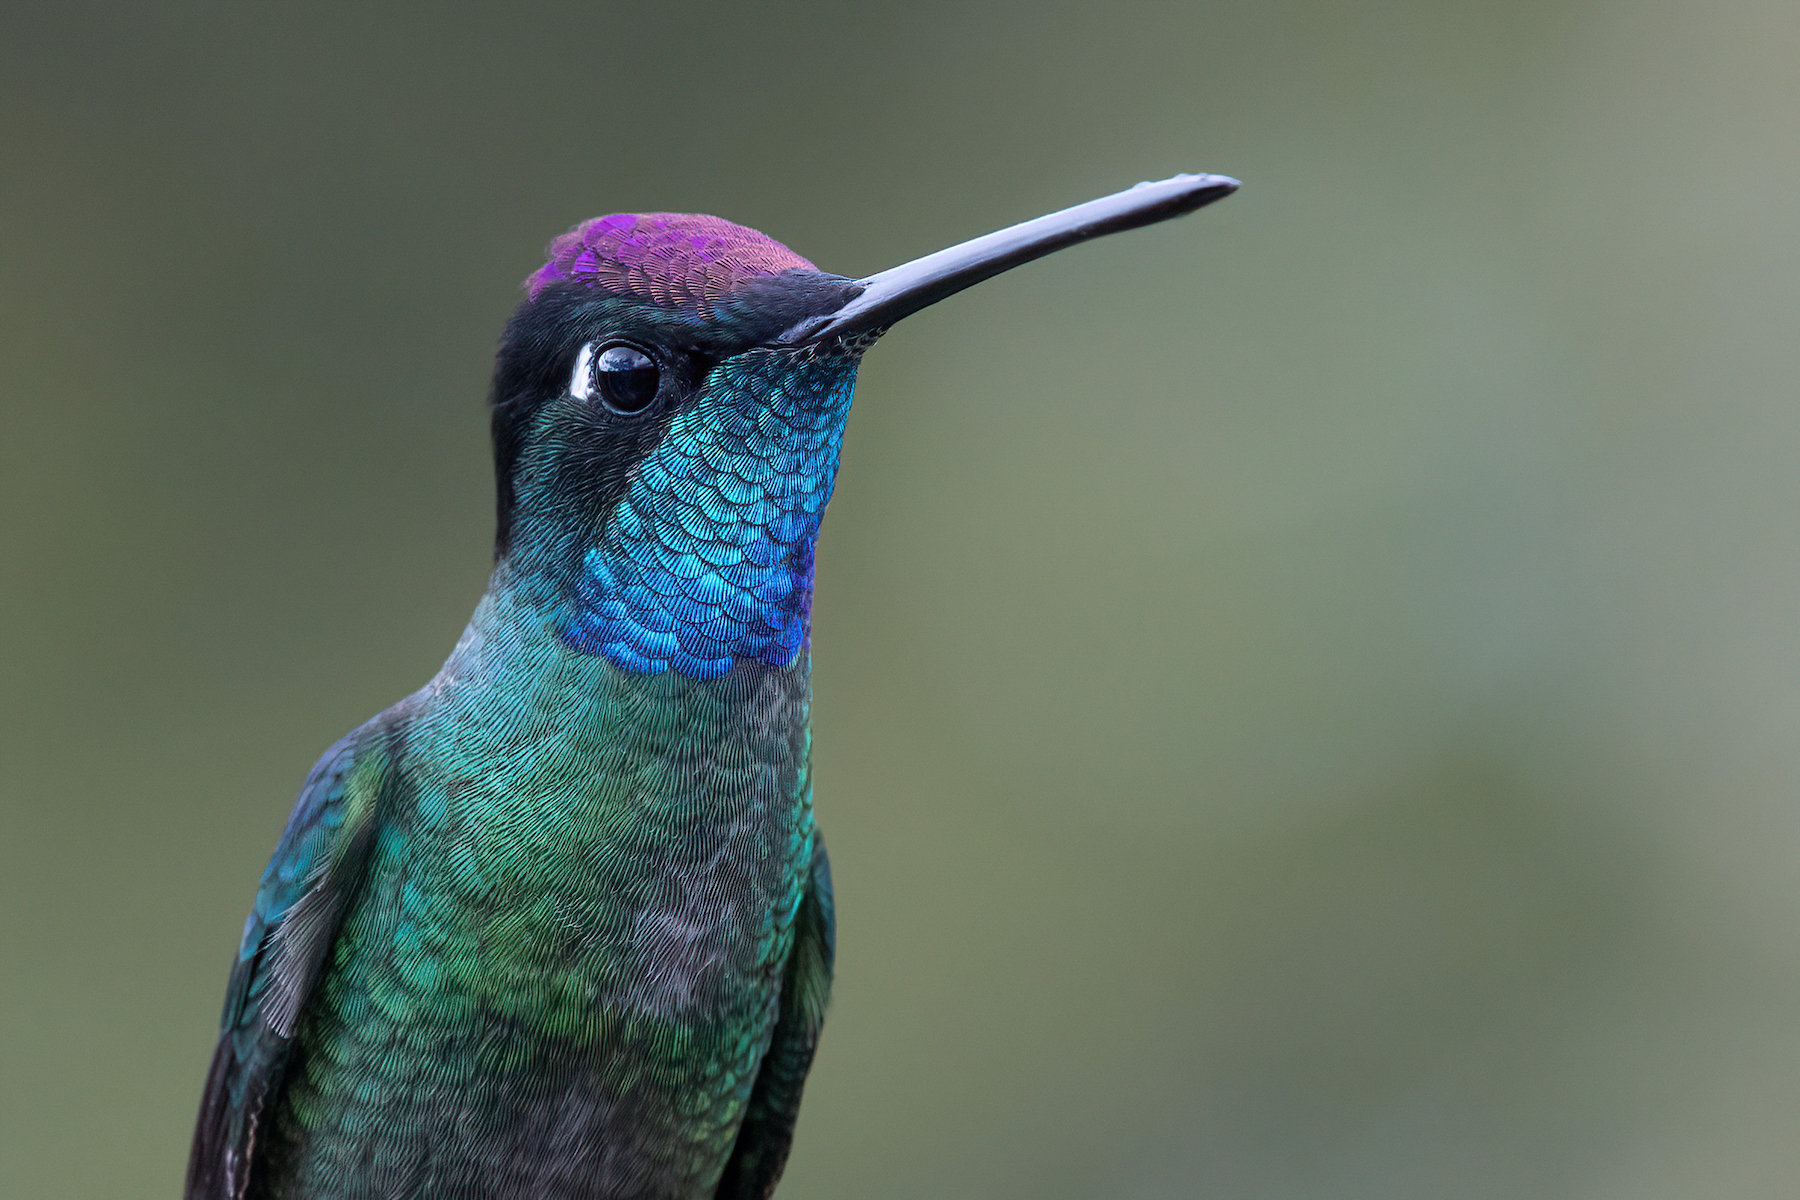 Portait of a Magnificent Hummingbird on our Costa Rica wildlife photography tour